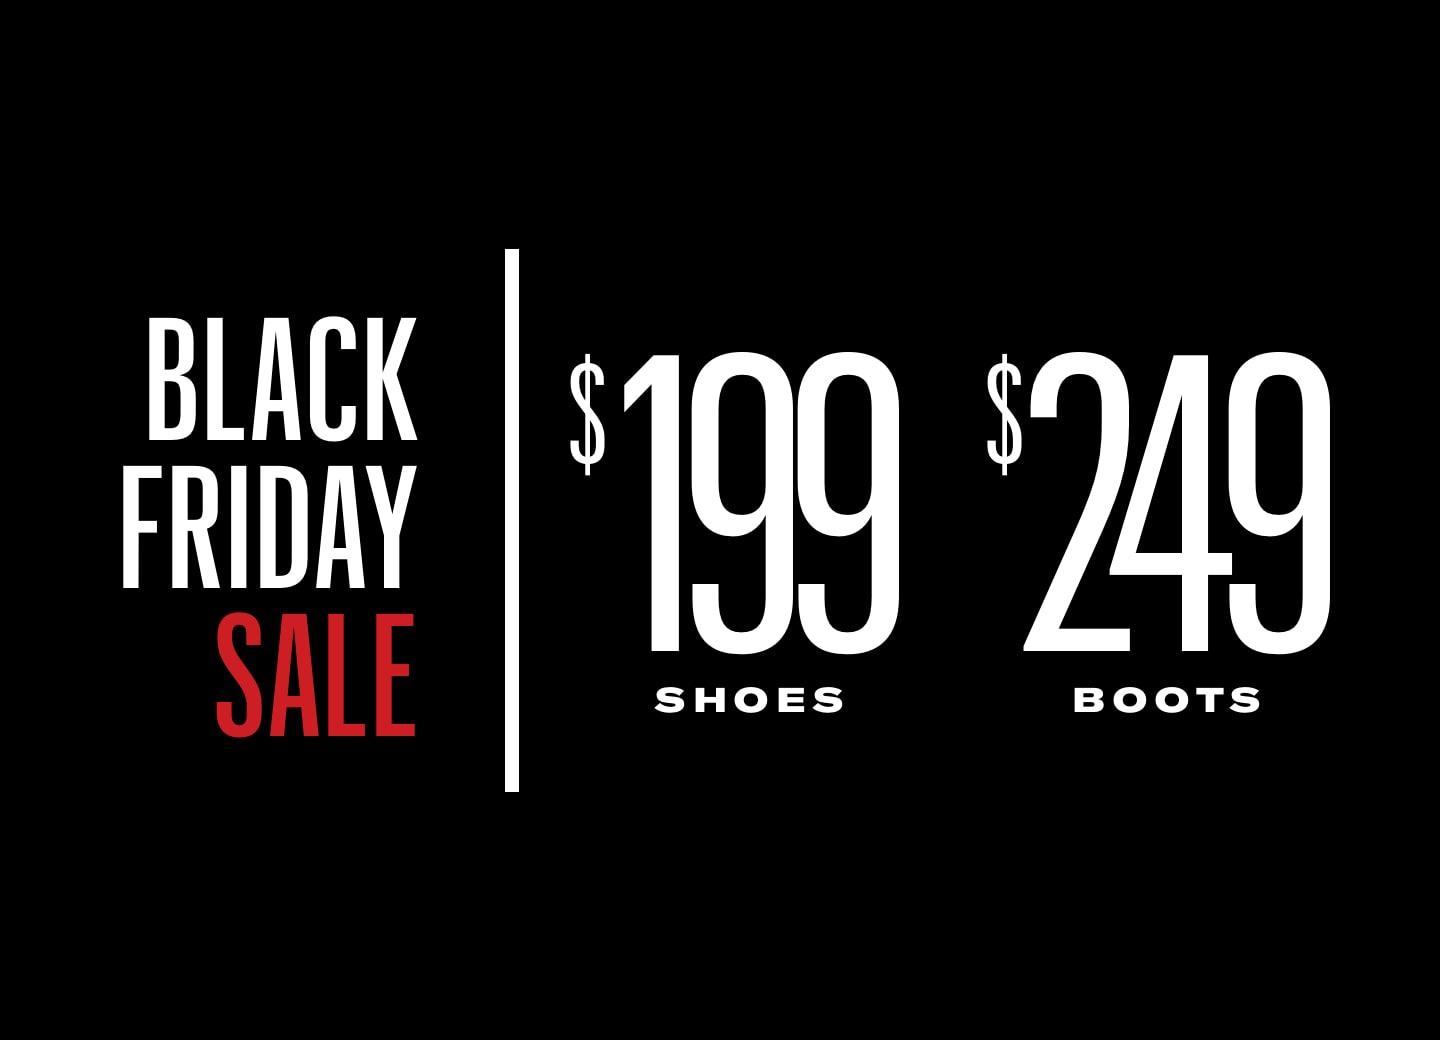 Black Friday Deals! Shoes $199 and Boots $249